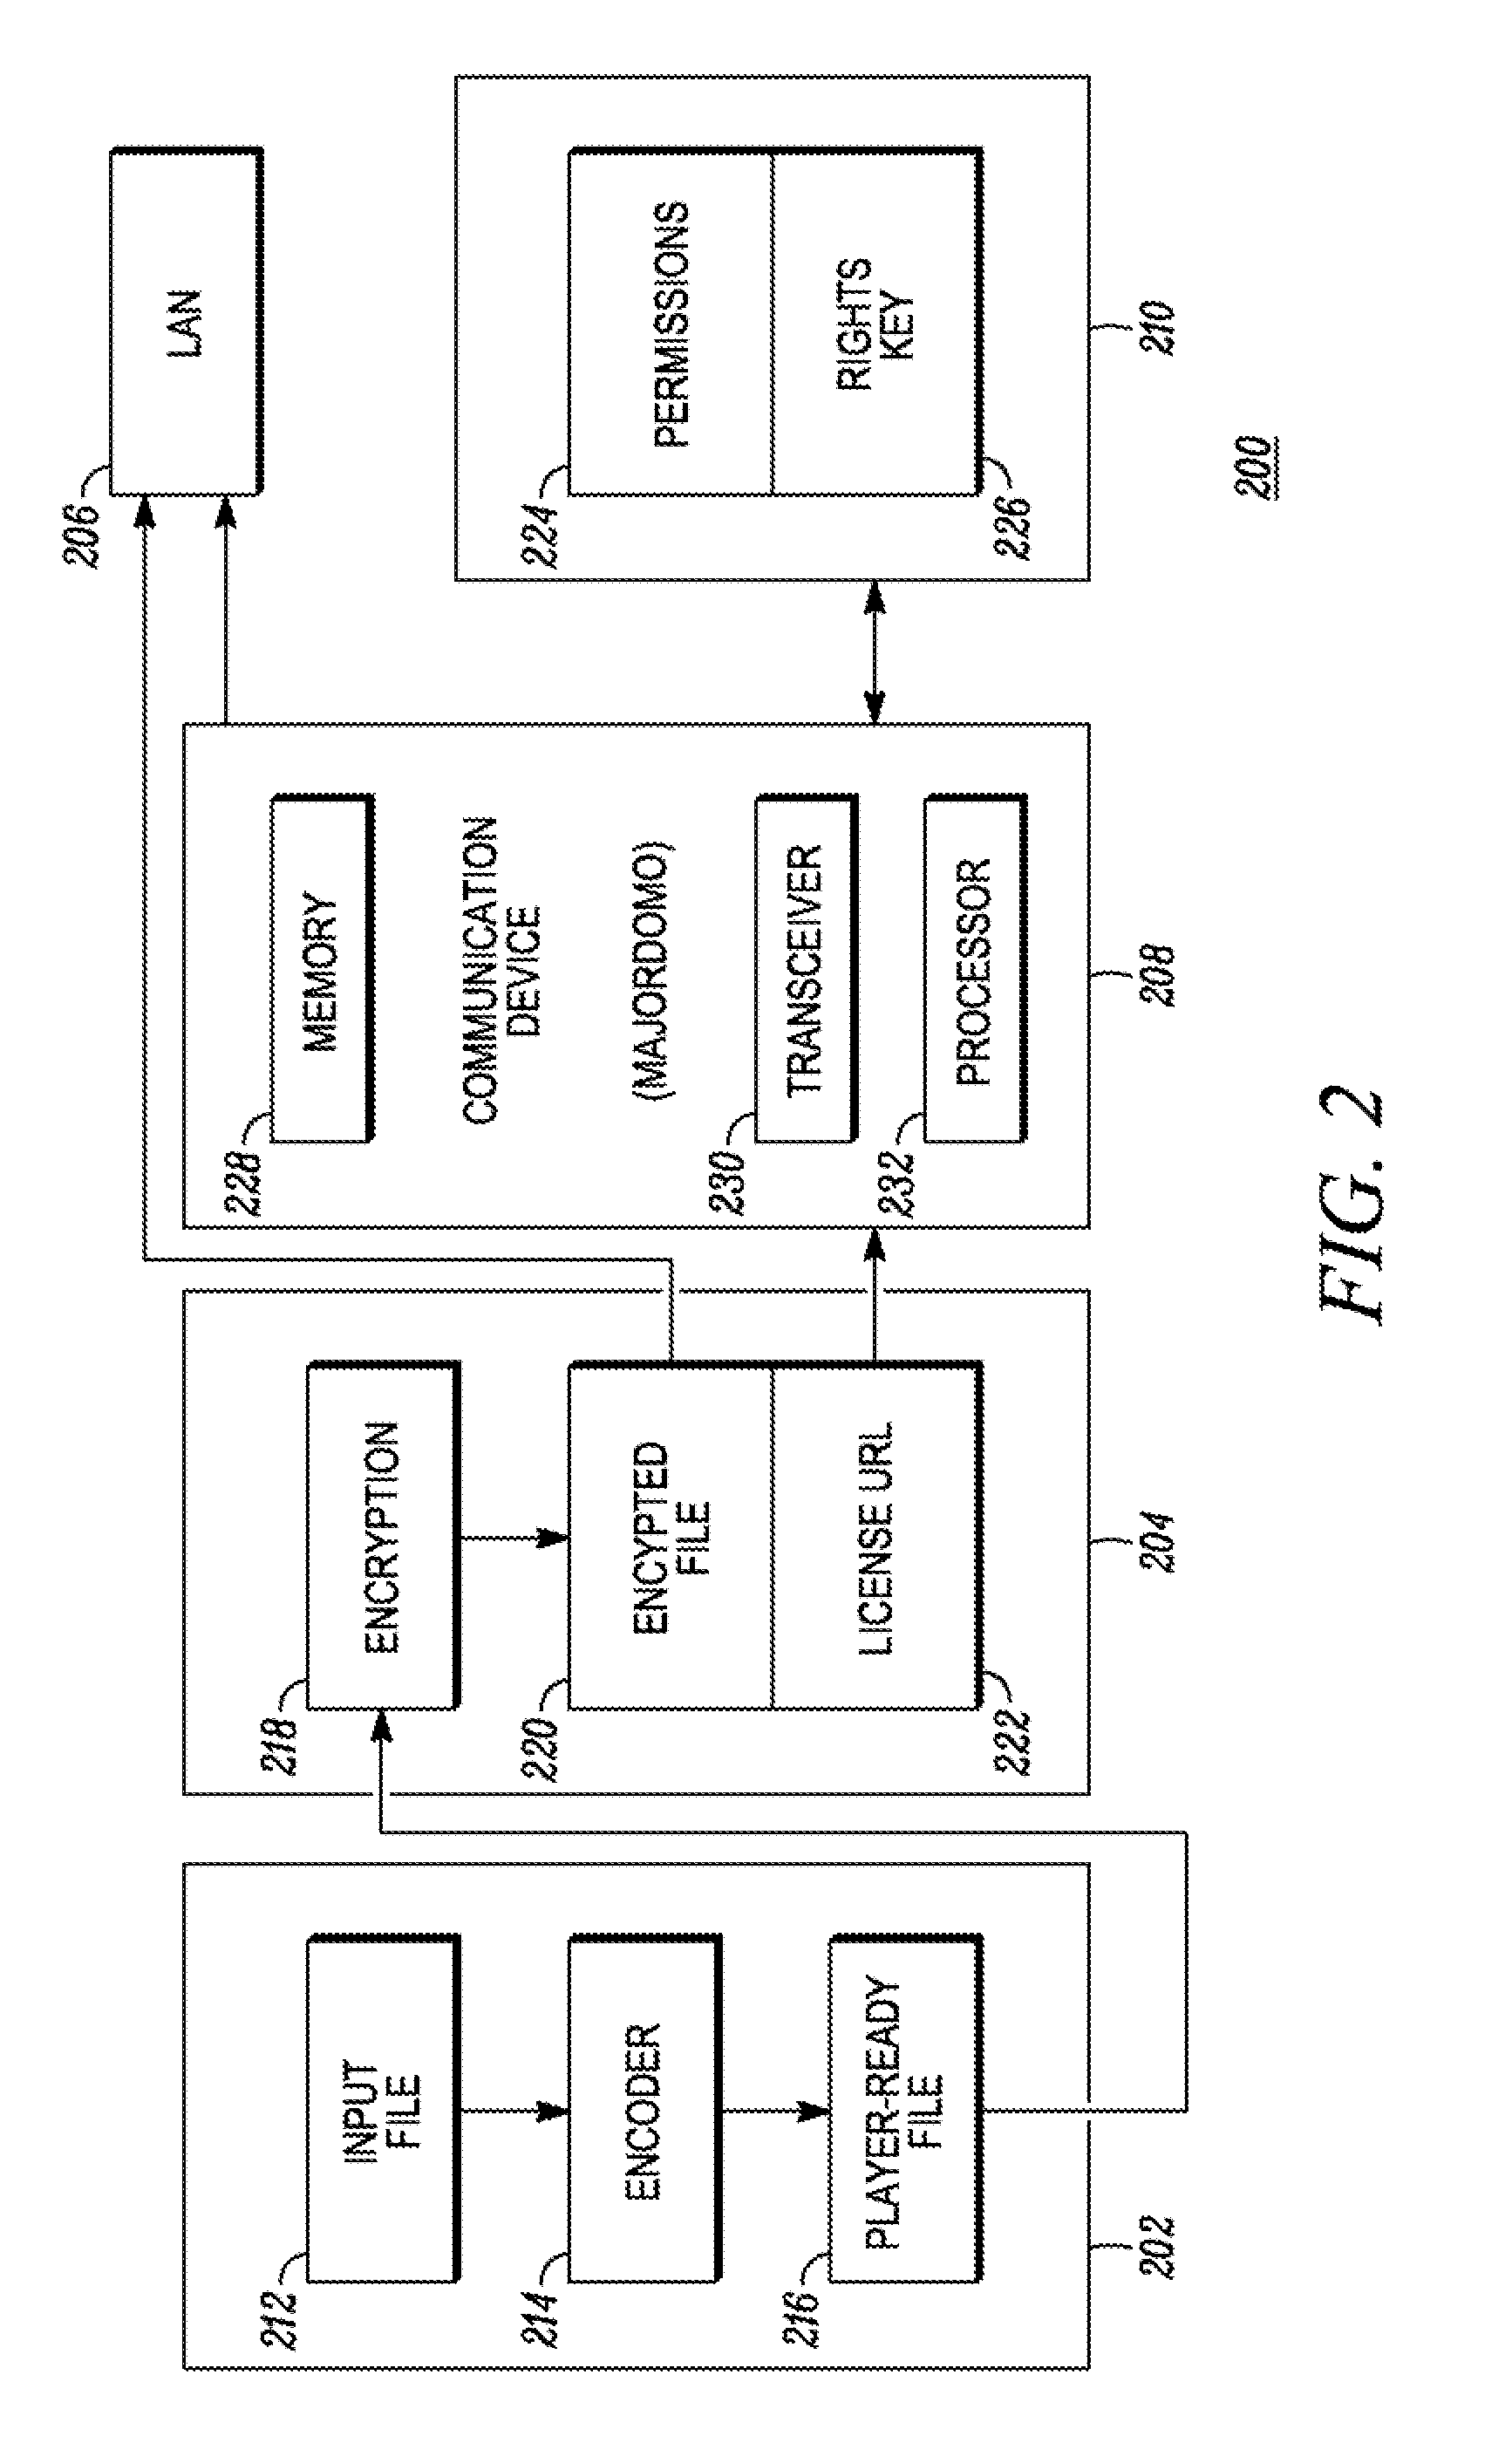 Method for managing security keys utilized by media devices in a local area network